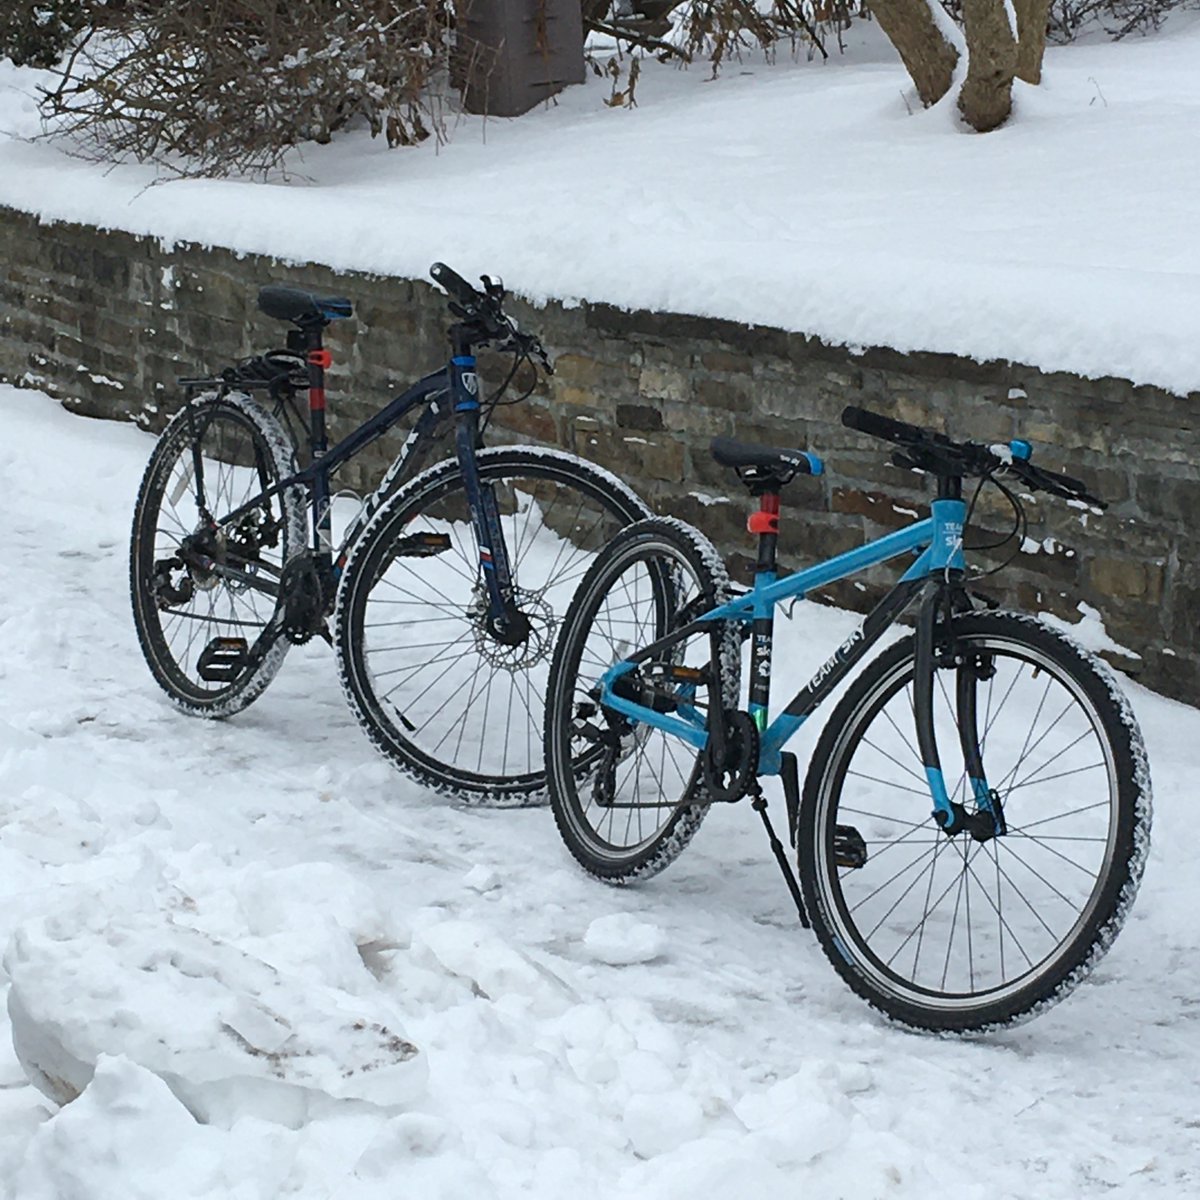 And then, last year - I decided not to stop riding for the winter. We got studded tires for all of our bikes, dressed for the weather, and just kept riding. When the going gets tough, we yell  #VikingBiking at the top of our lungs - it’s an excellent motivator!